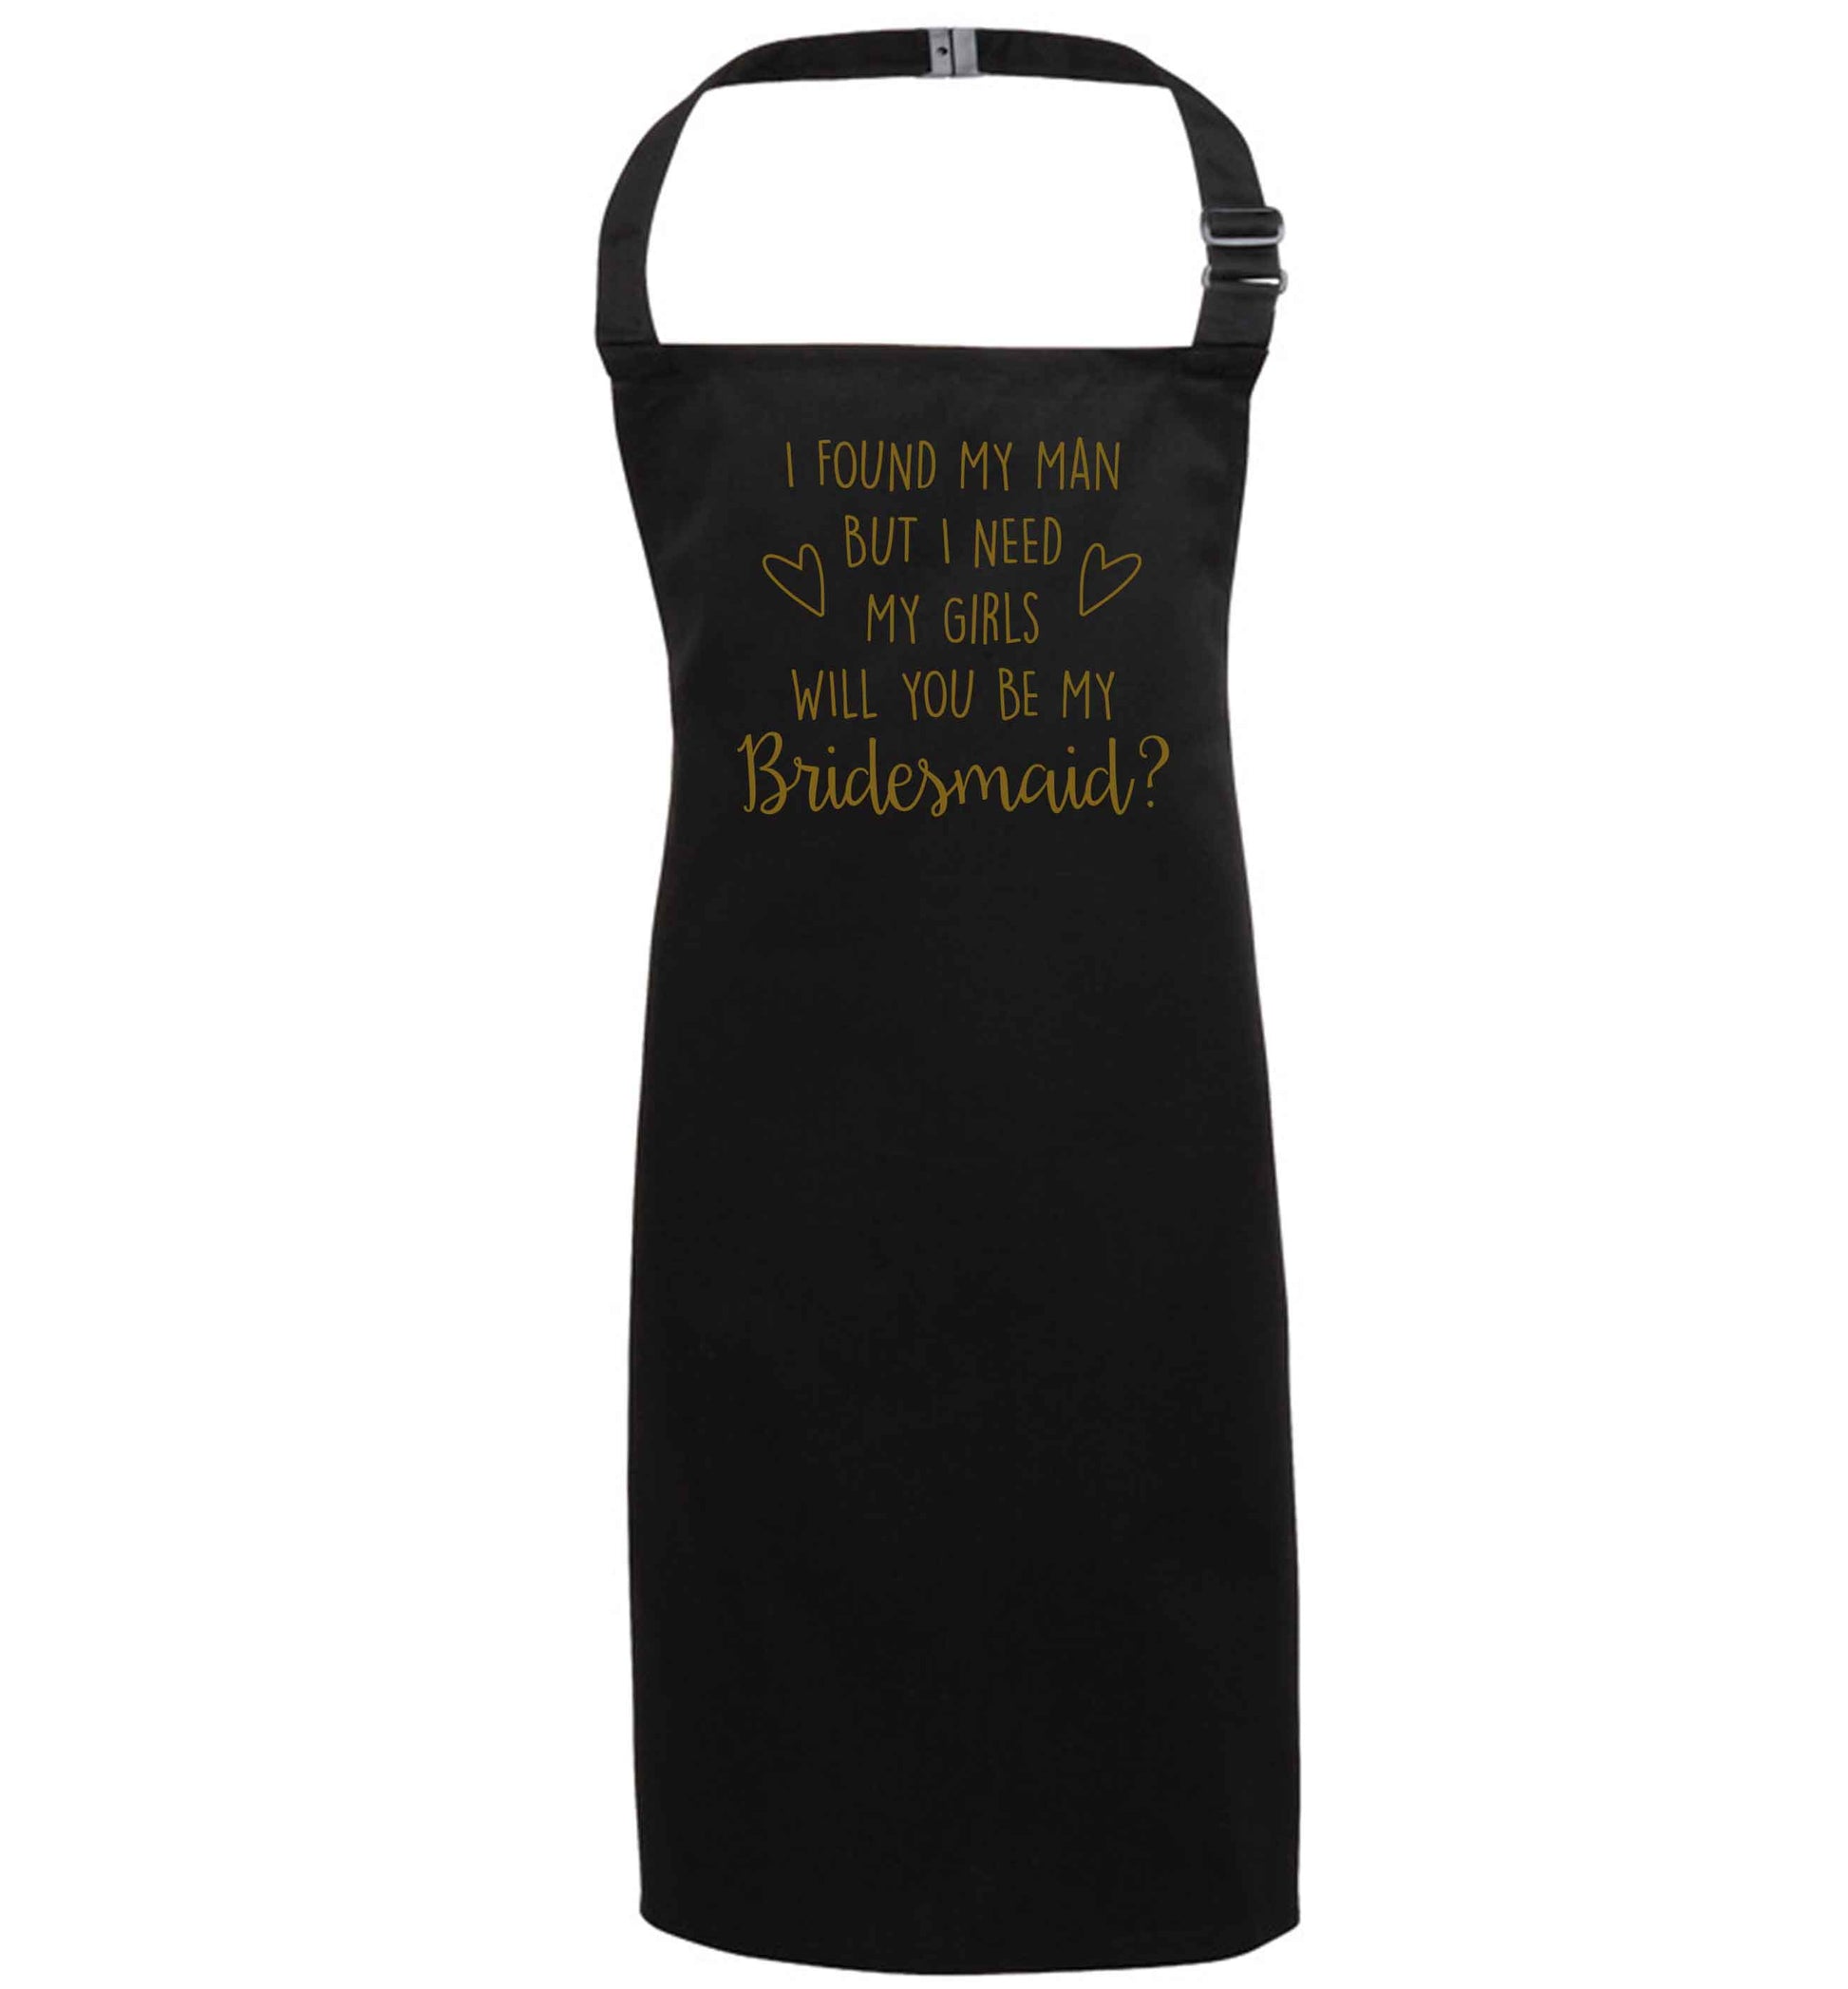 I found my man but I need my girls will you be my bridesmaid? black apron 7-10 years